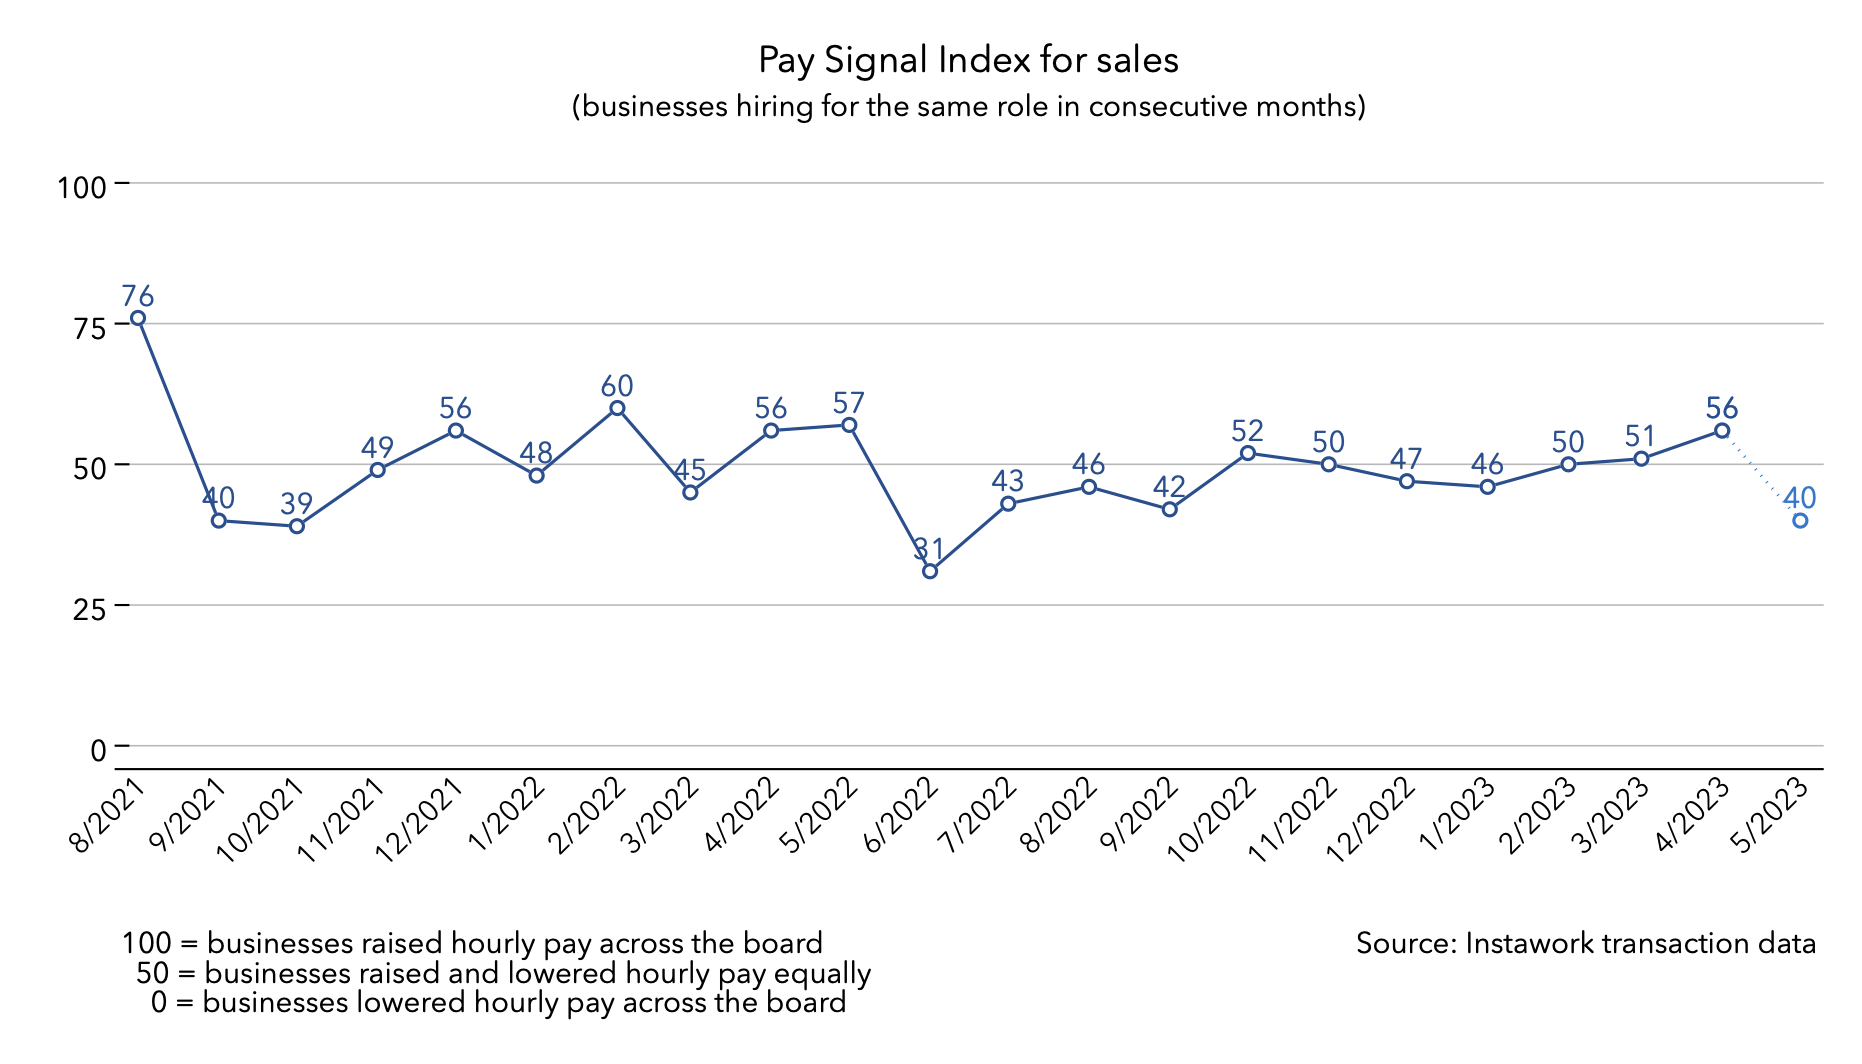 1 May 2023 Pay Signal Index for sales